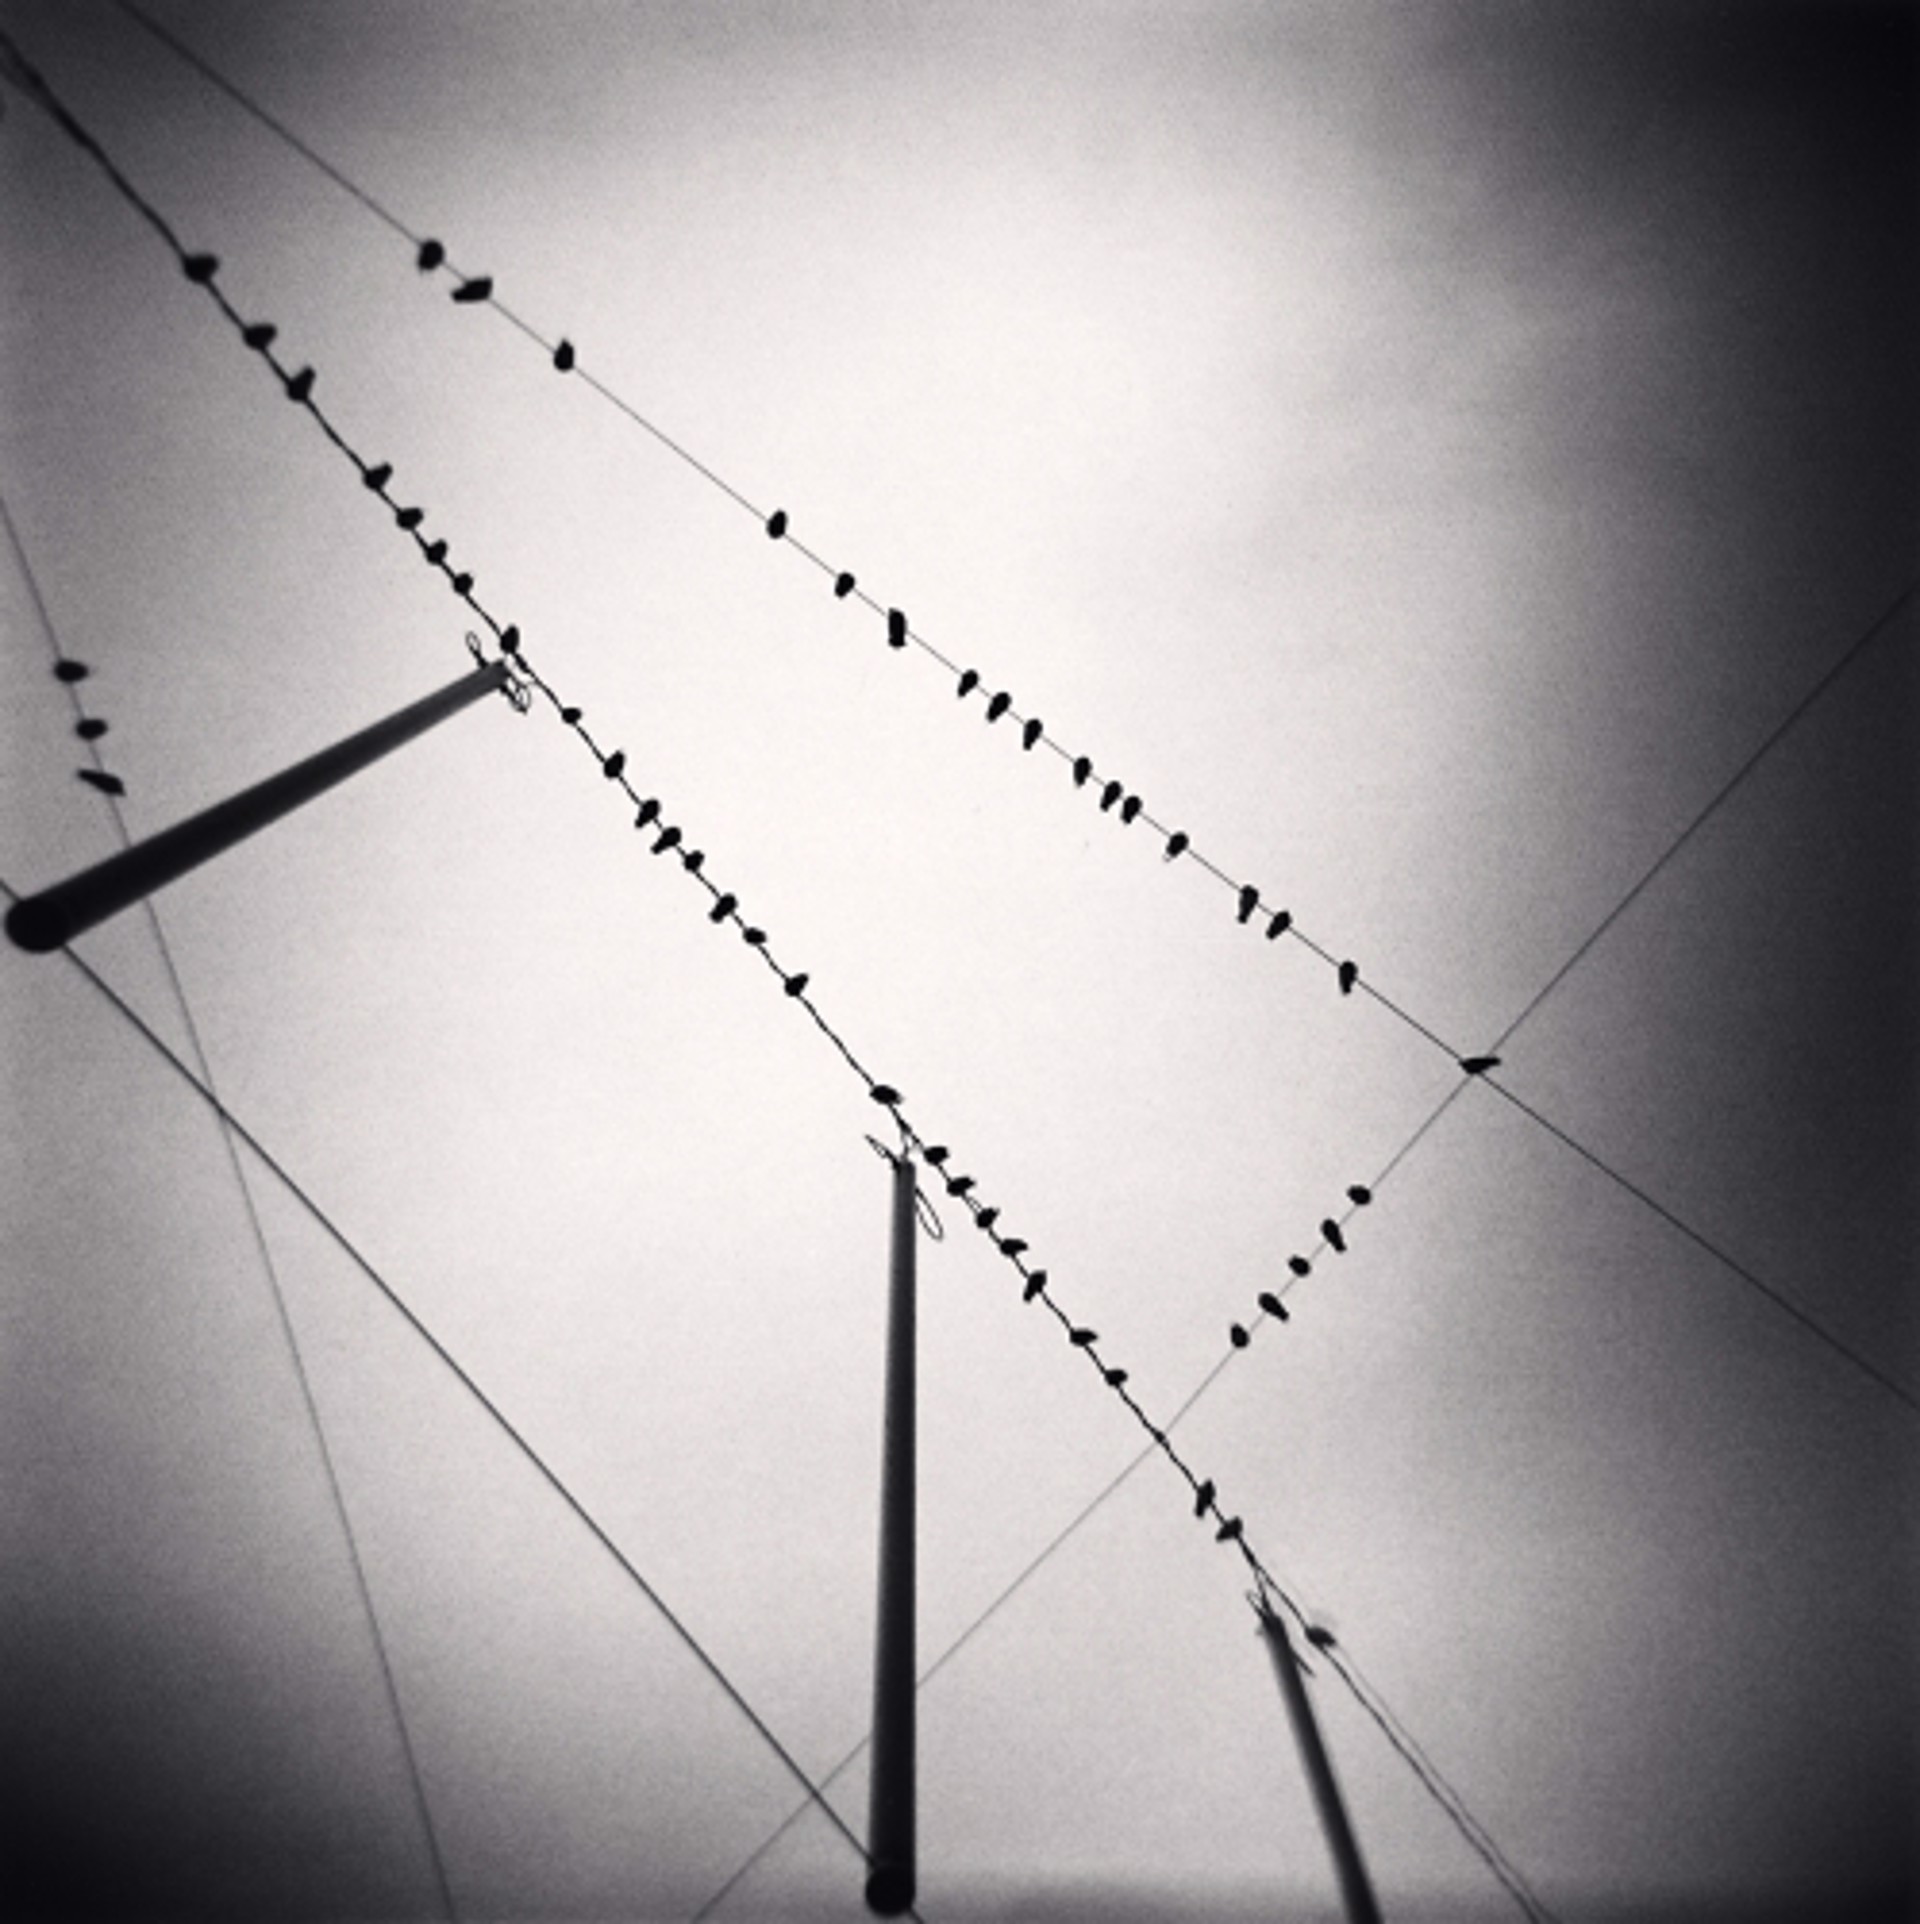 Fifty Two Birds, Zurich (edition of 45) by Michael Kenna